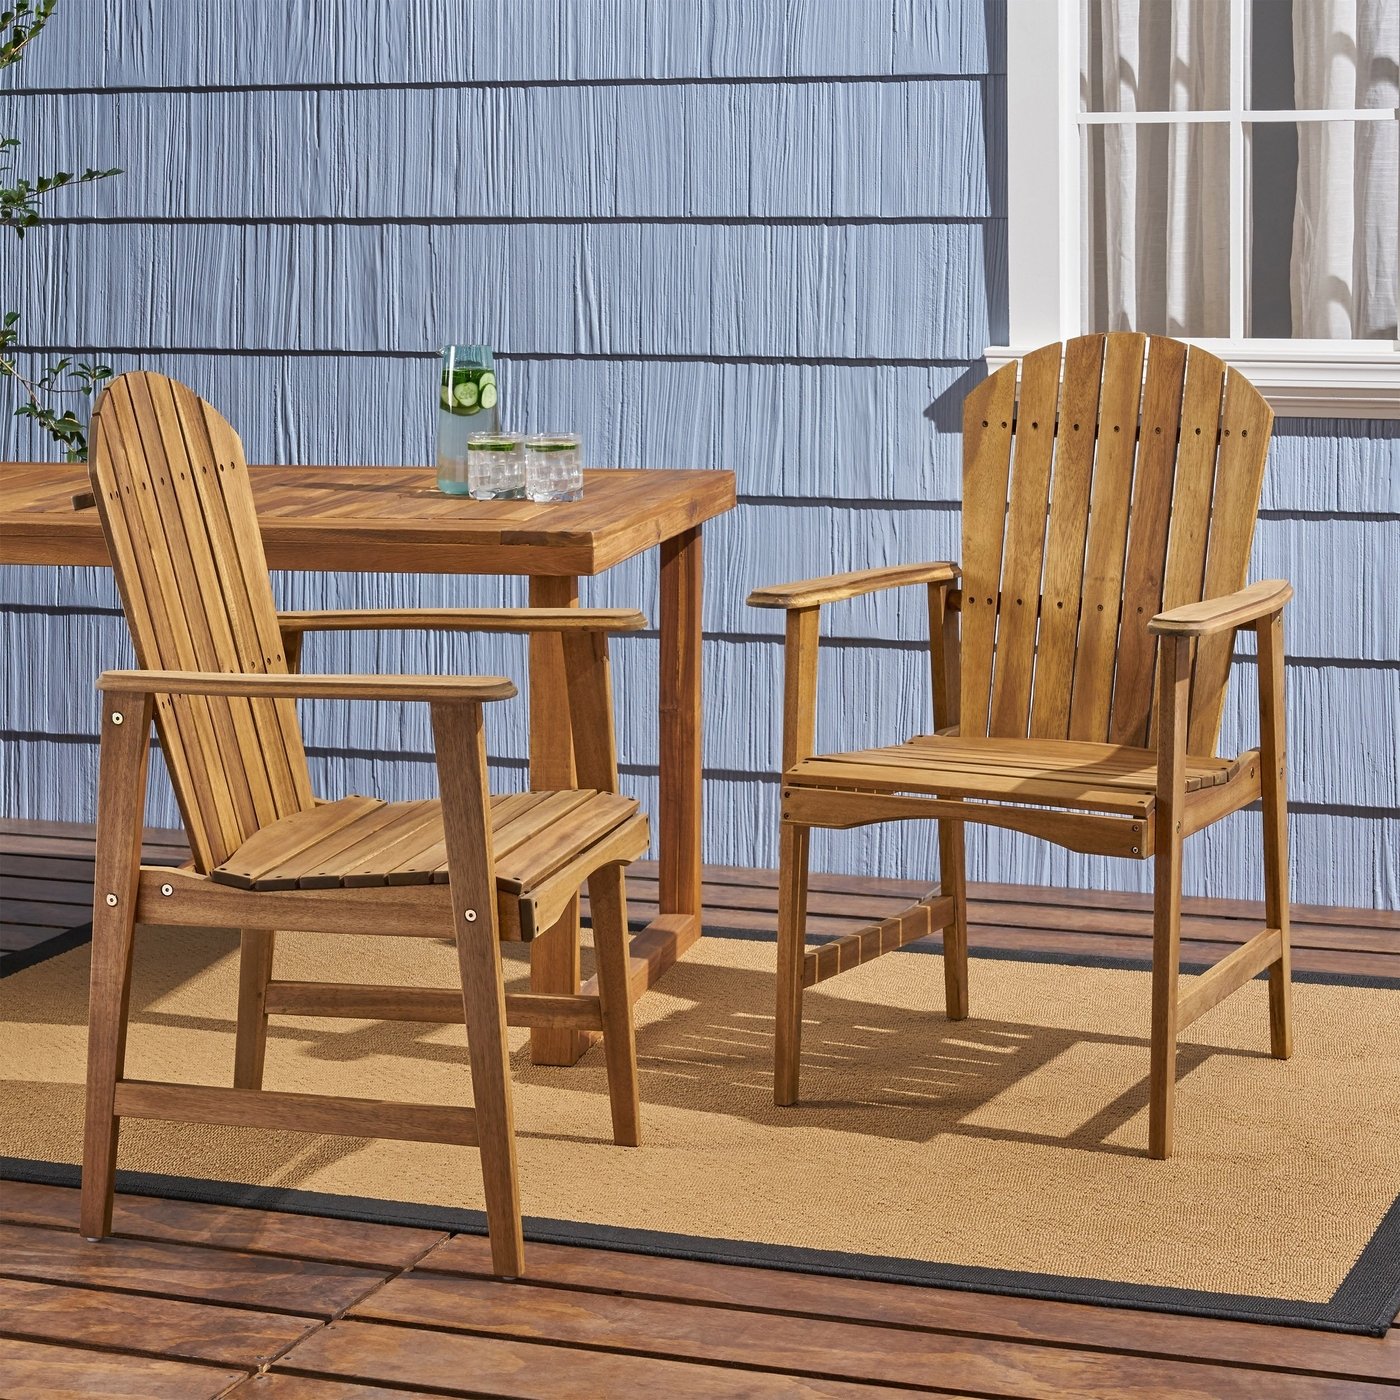 5 Expert Tips To Choose Patio Dining Chairs - VisualHunt